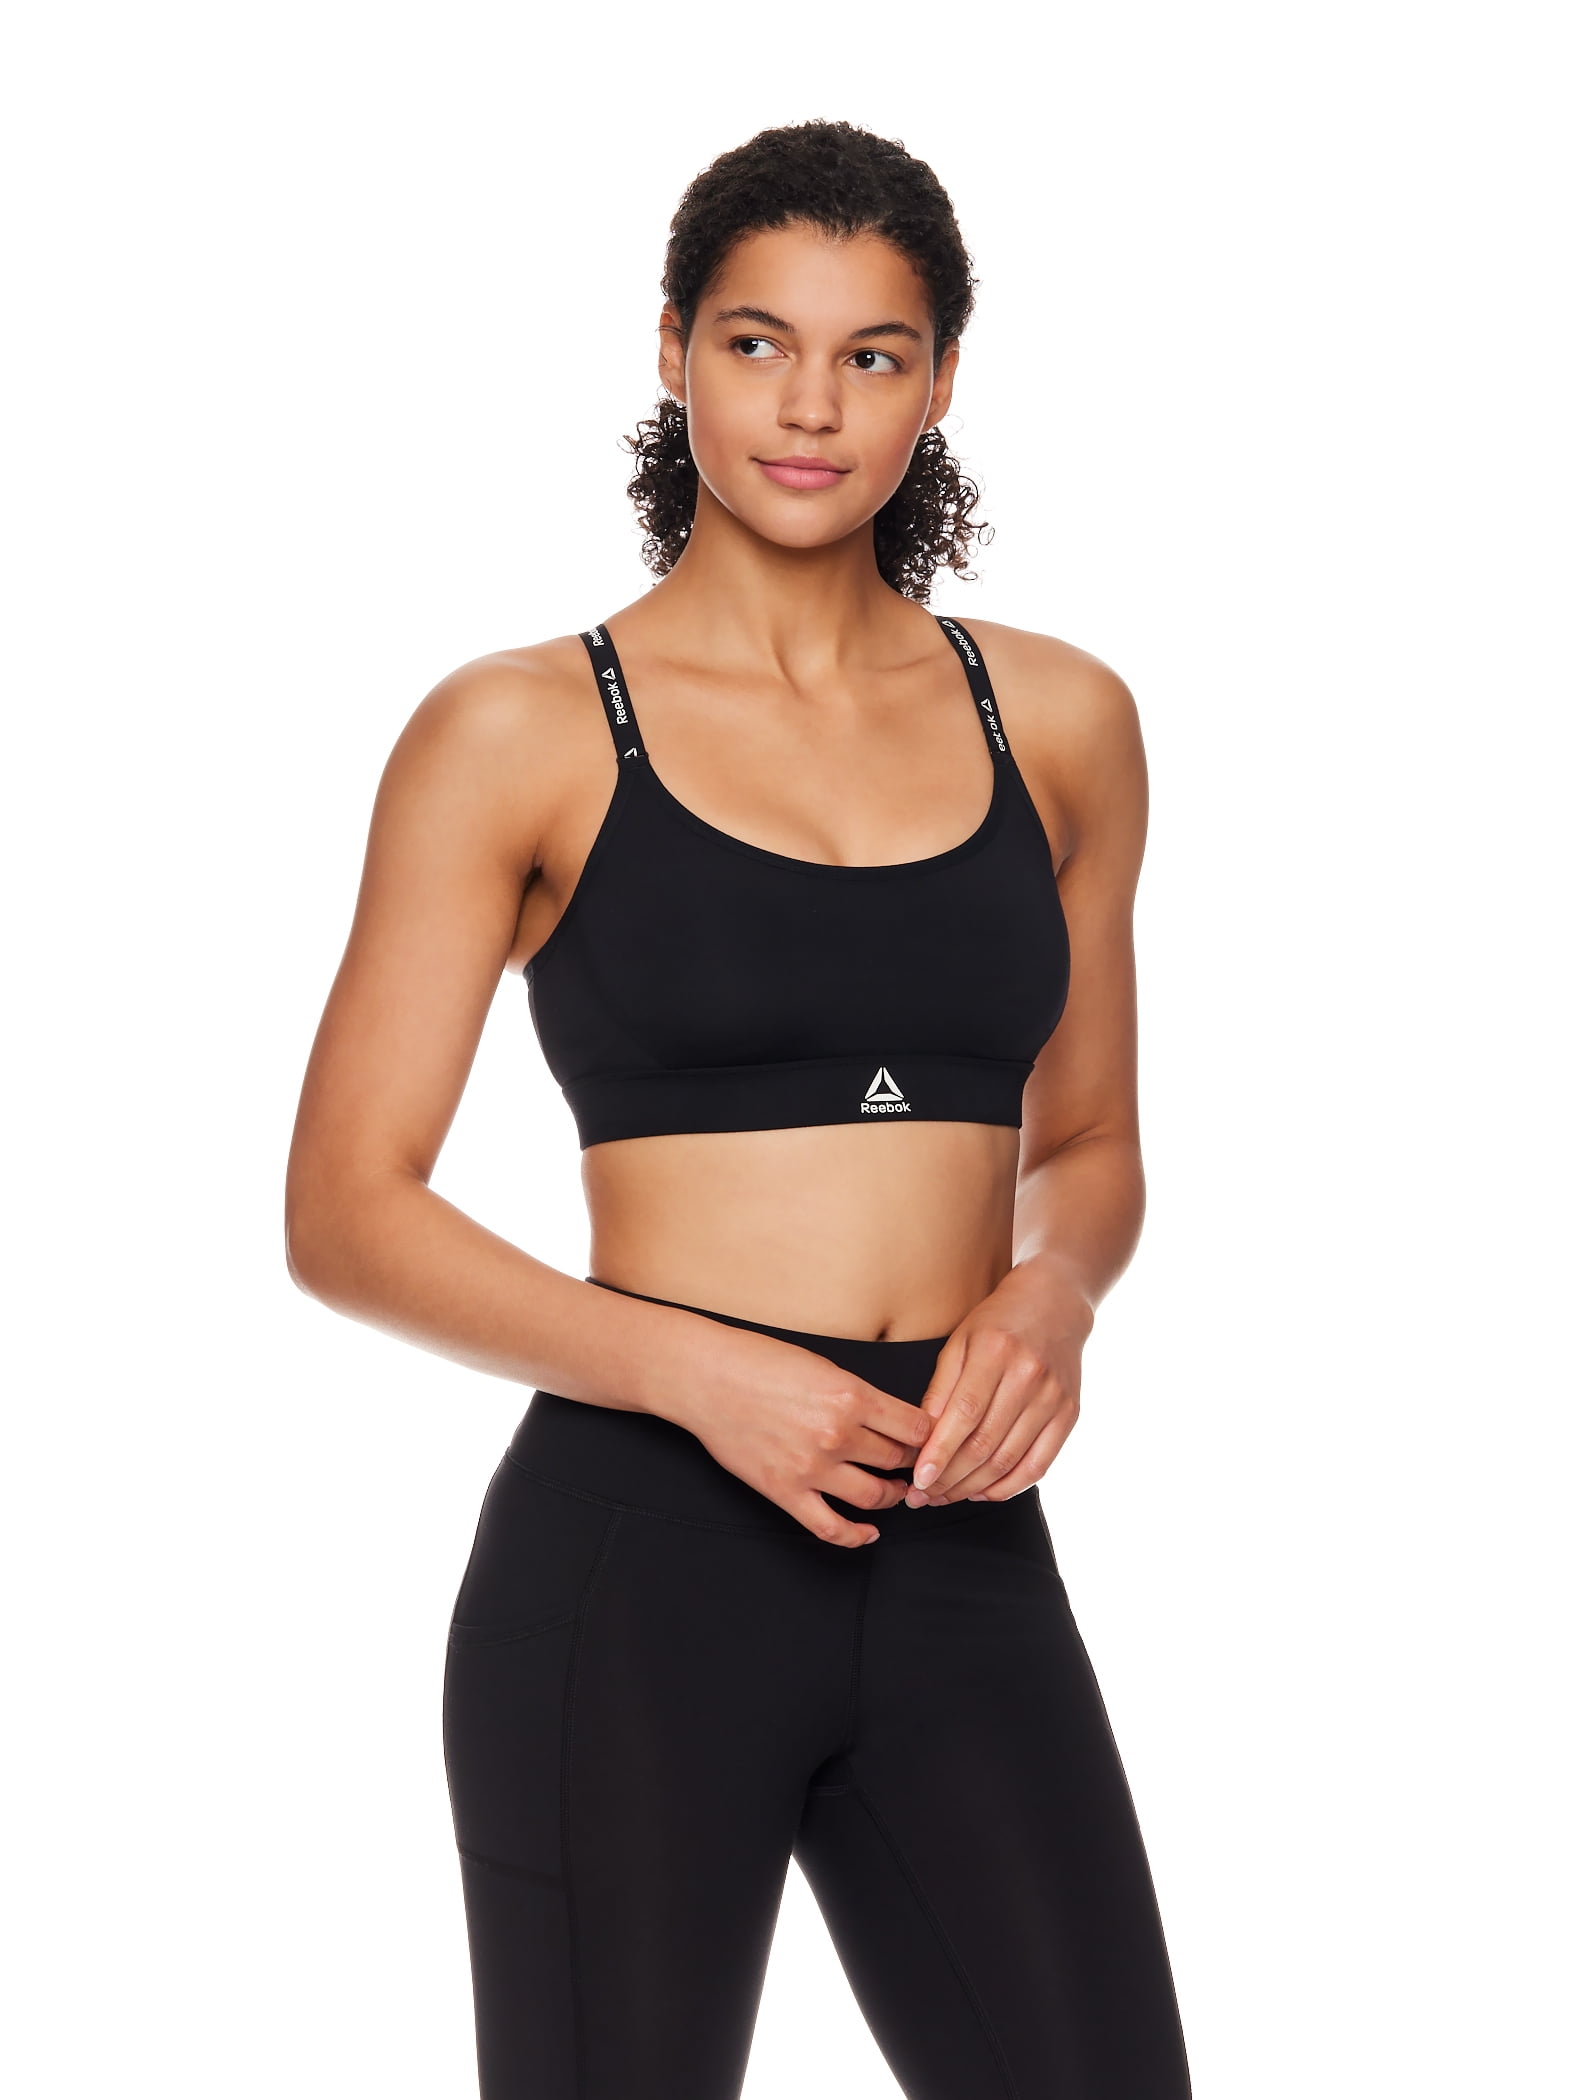 Reebok Women's Low Impact Favorite Bra with Removable Cups, Sizes